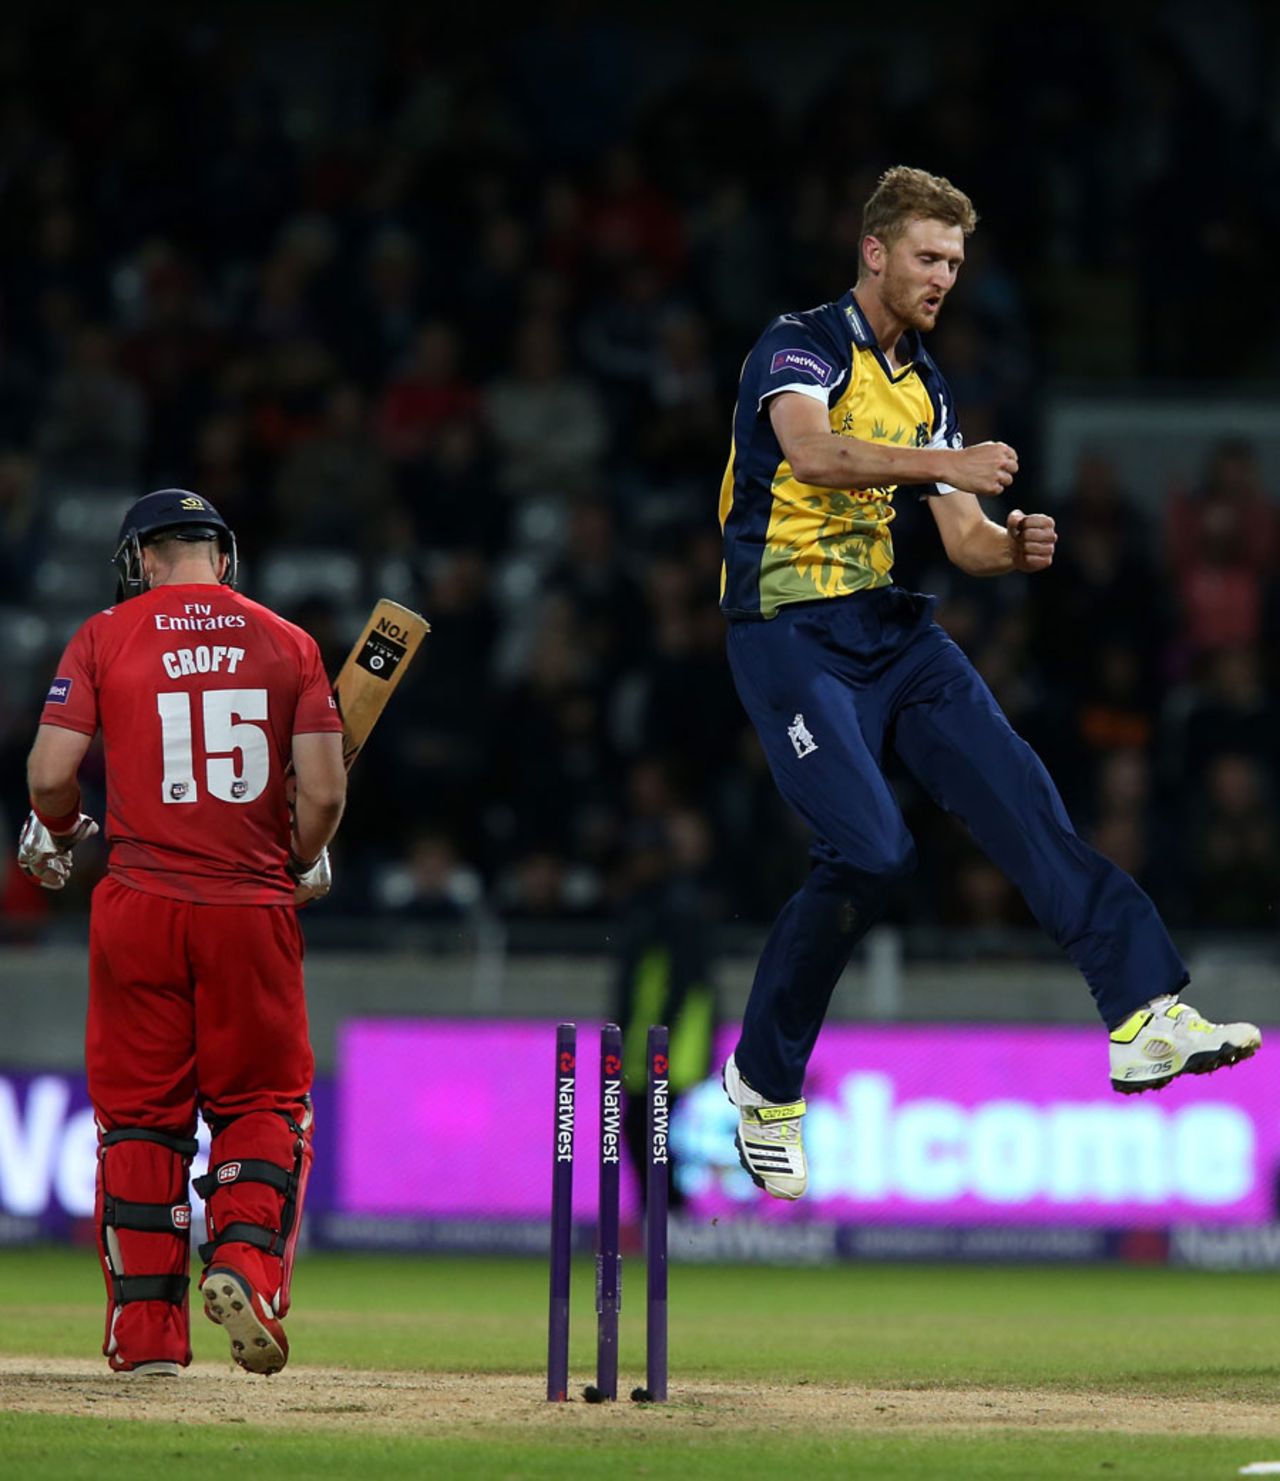 Oliver Hannon-Dalby picked up three wickets in a crucial spell, Birmingham v Lancashire, NatWest T20 Blast final, Edgbaston, August 23, 2014